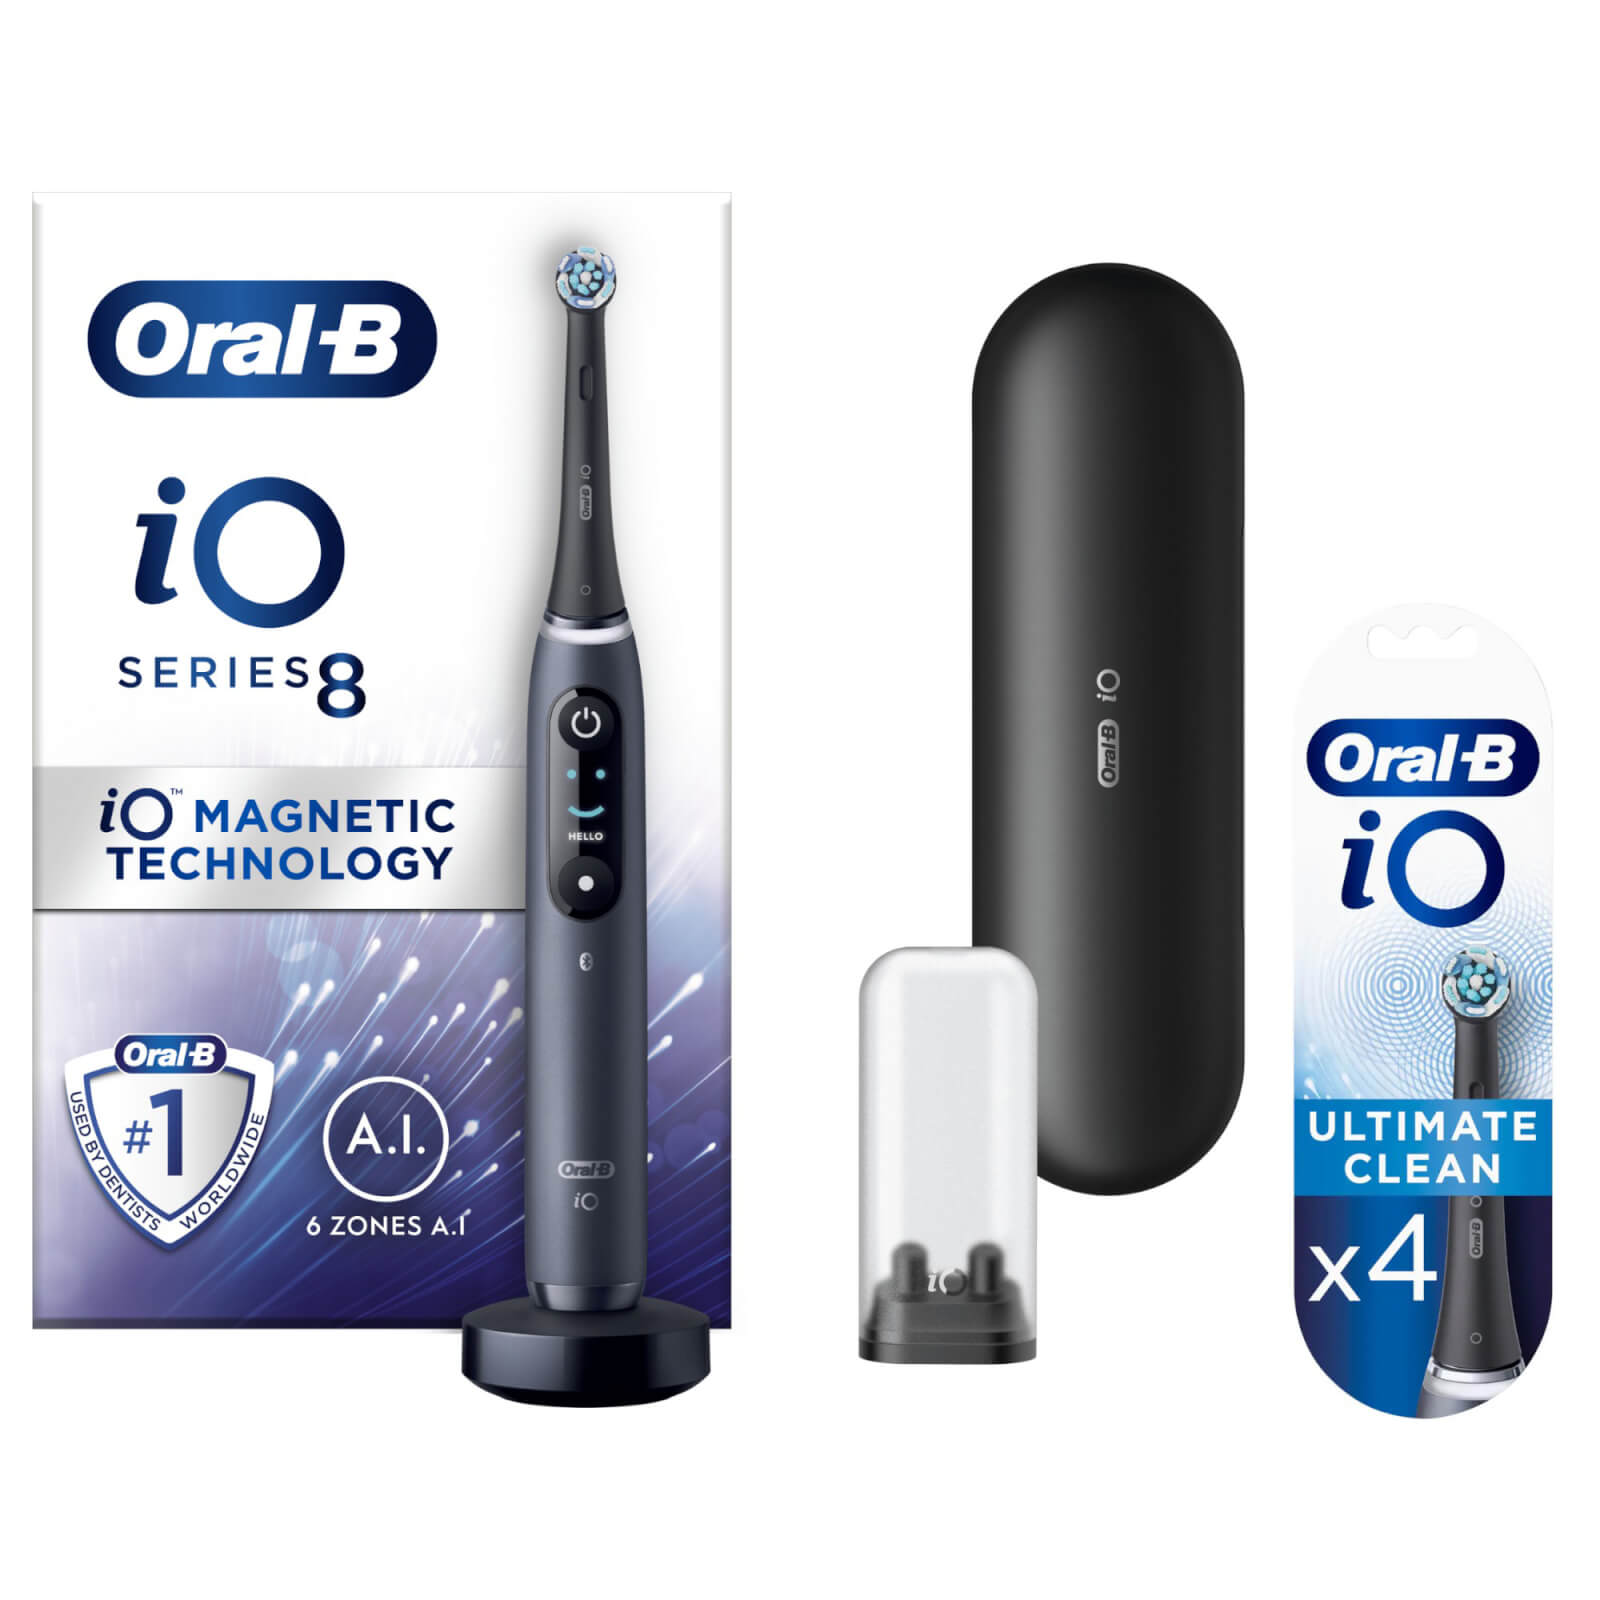 Oral B iO8 Black Electric Toothbrush with Travel Case - Toothbrush + 4 Refills